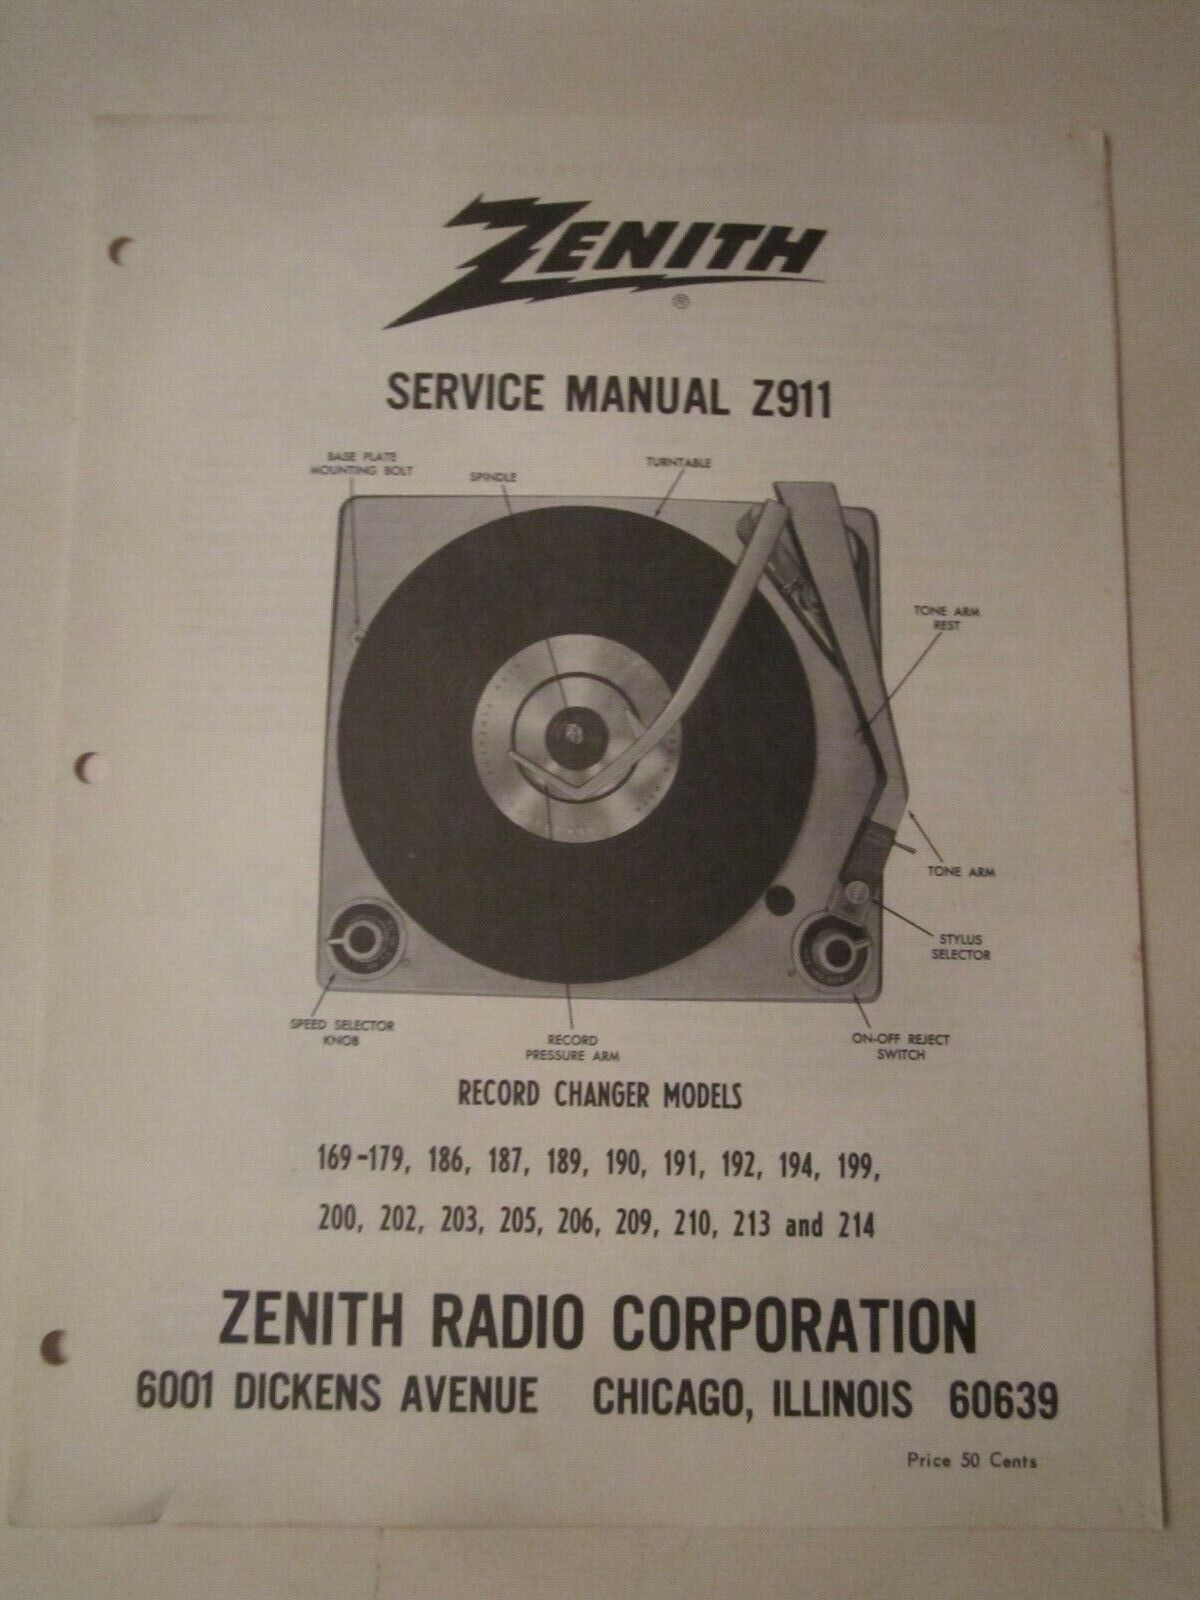 LOT OF 10 ZENITH STEREO SERVICE MANUALS - CIRCA 1970'S - ASSORTED LOT -  LOT R